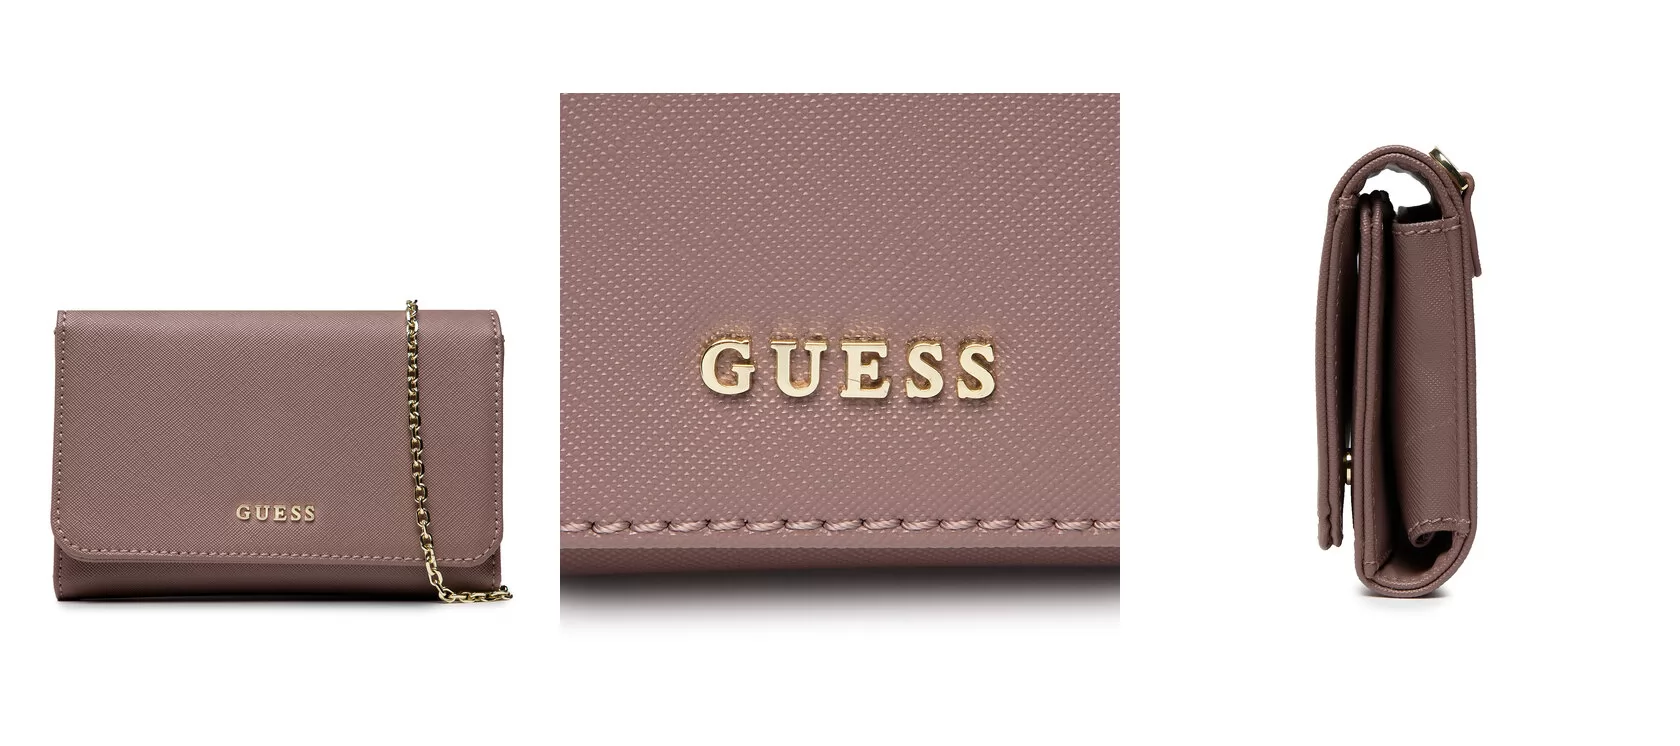 Guess Torebka Not Coordinated Accessories PW1514 P2426 Różowy